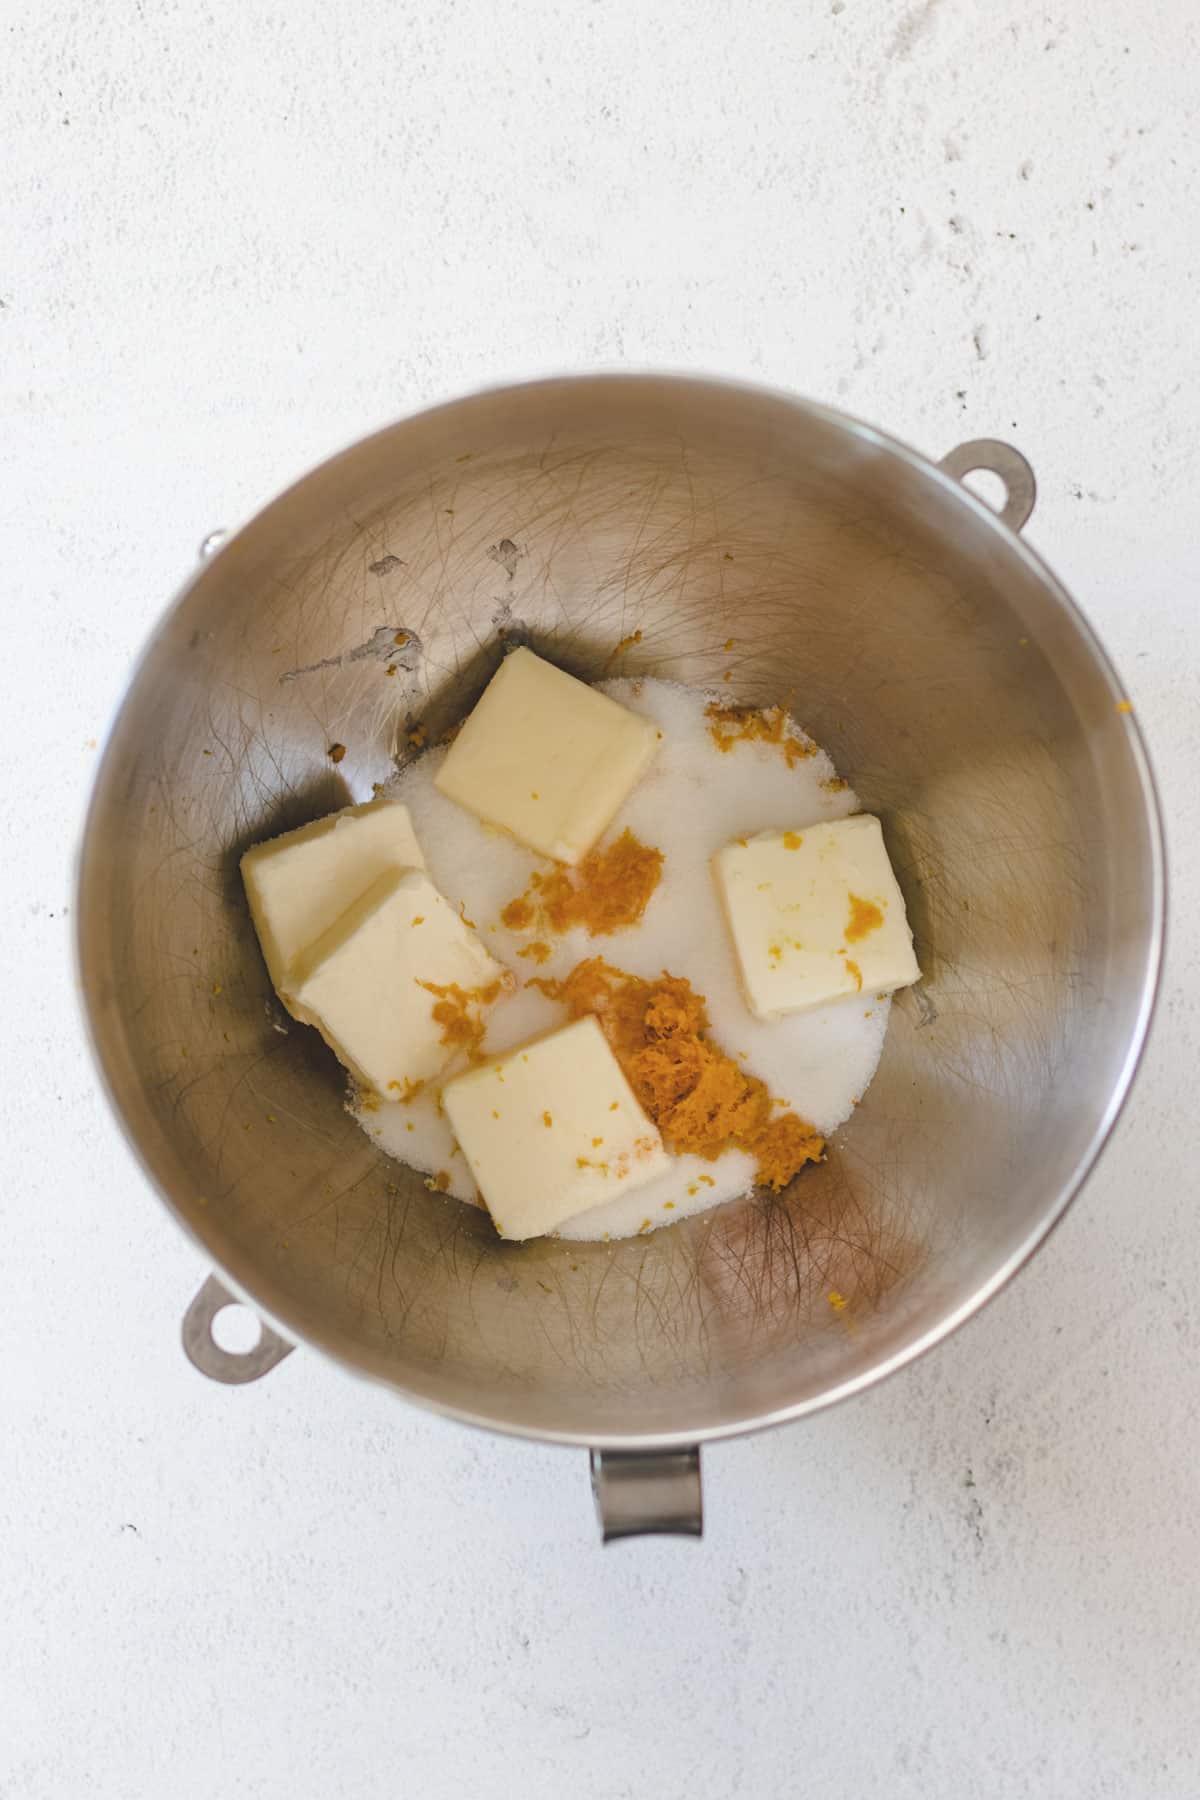 Creaming butter, sugar, and orange zest in a mixing bowl.